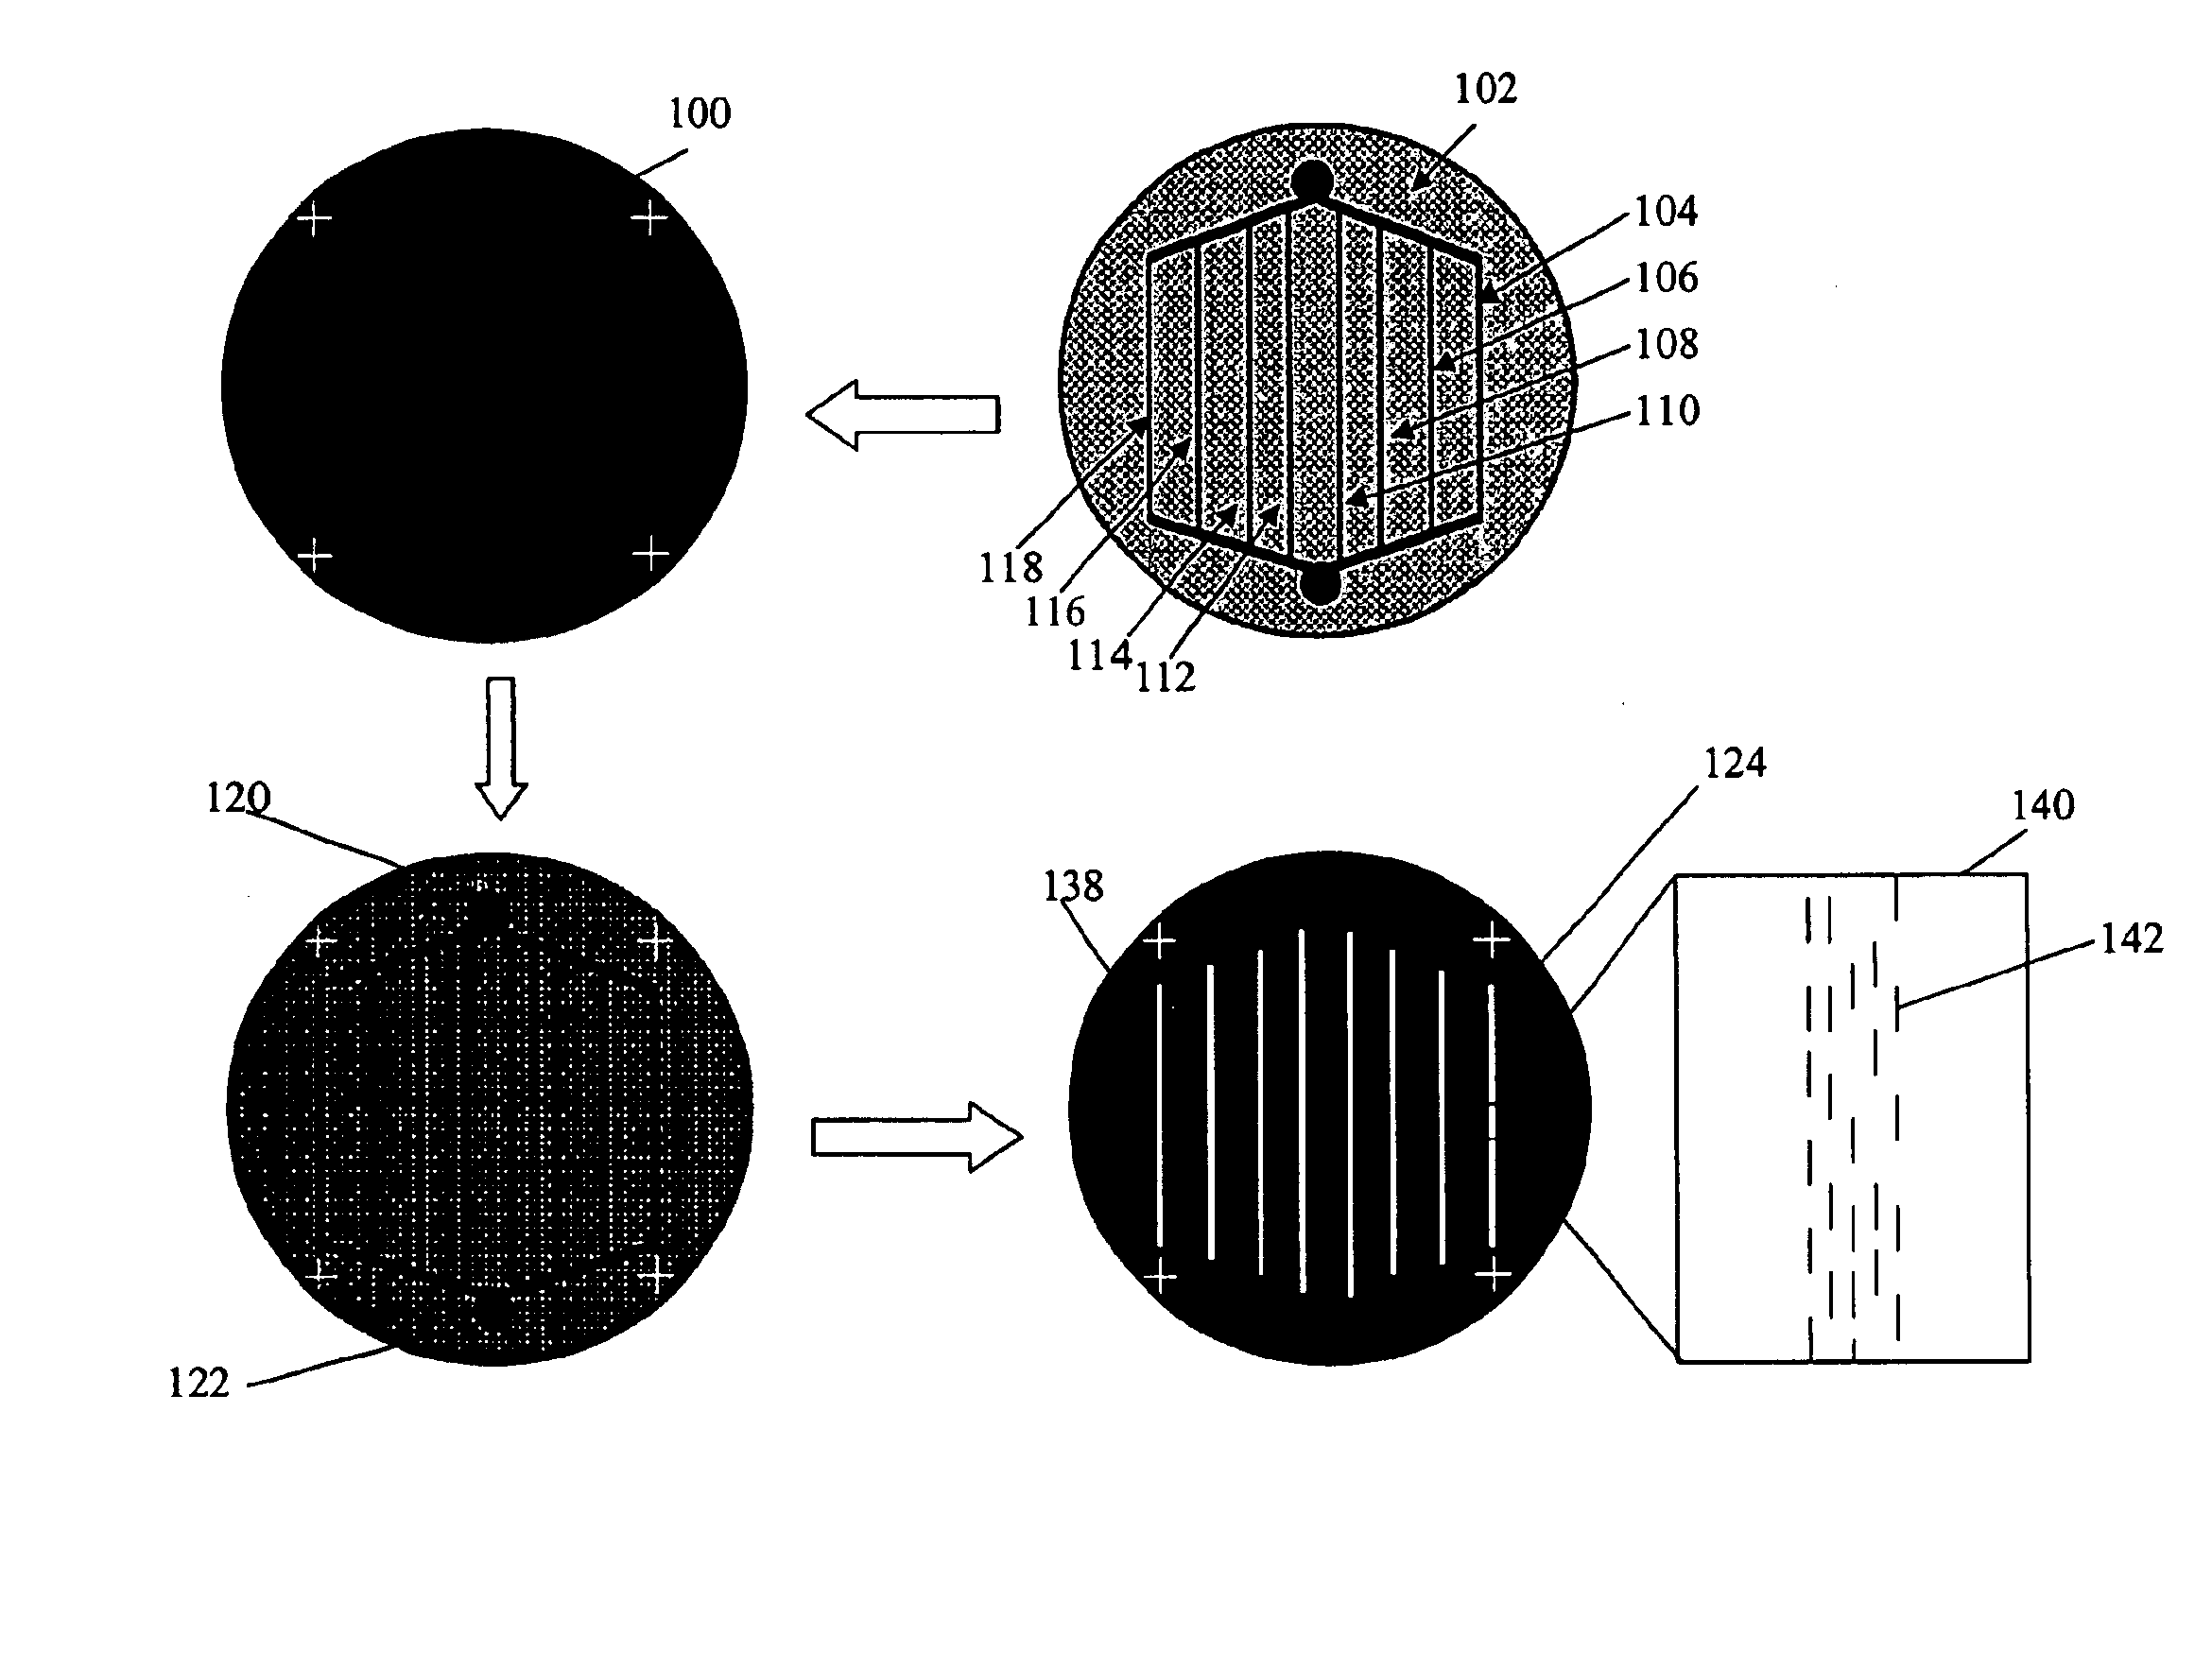 Methods of positioning and/or orienting nanostructures